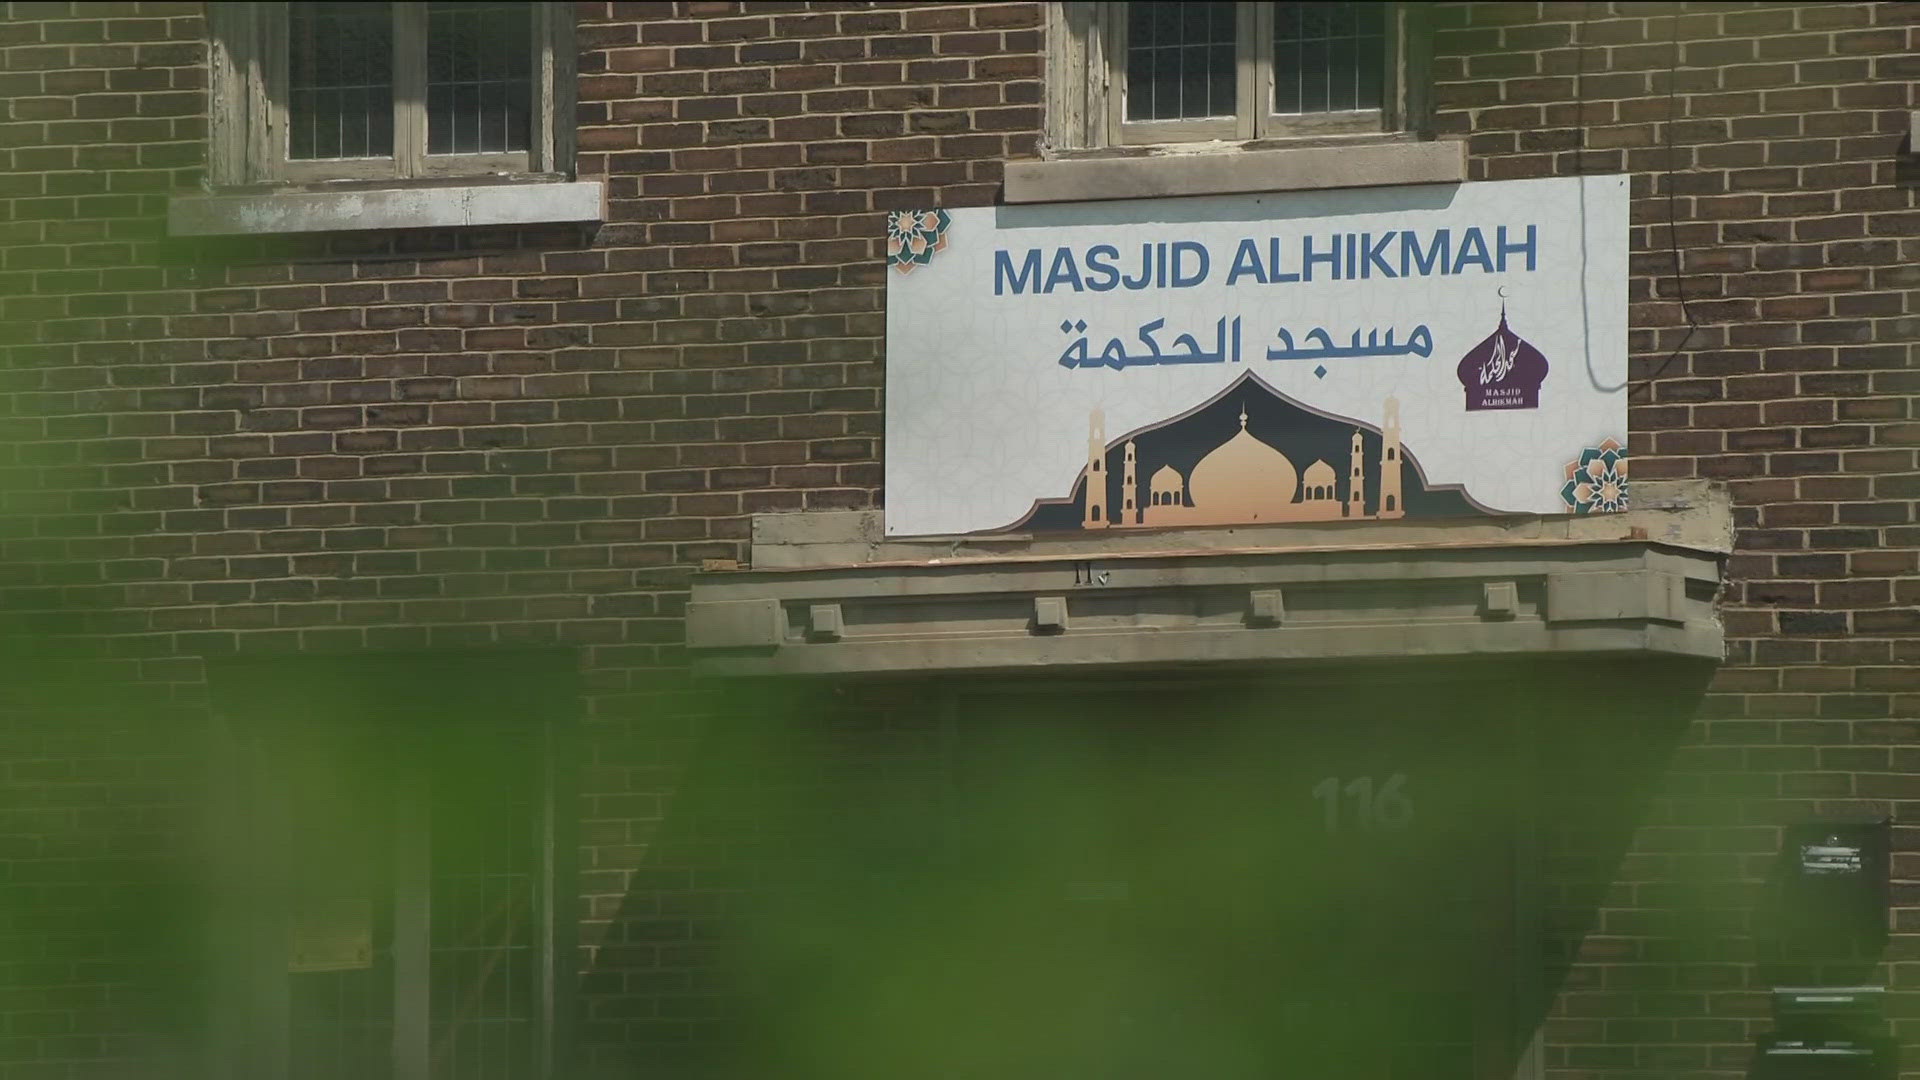 Alhikma Islamic Center Imam Abdirzak Kaynin said mosque officials have called the police on the 37-year-old suspect over 20 times in the past three to four years.